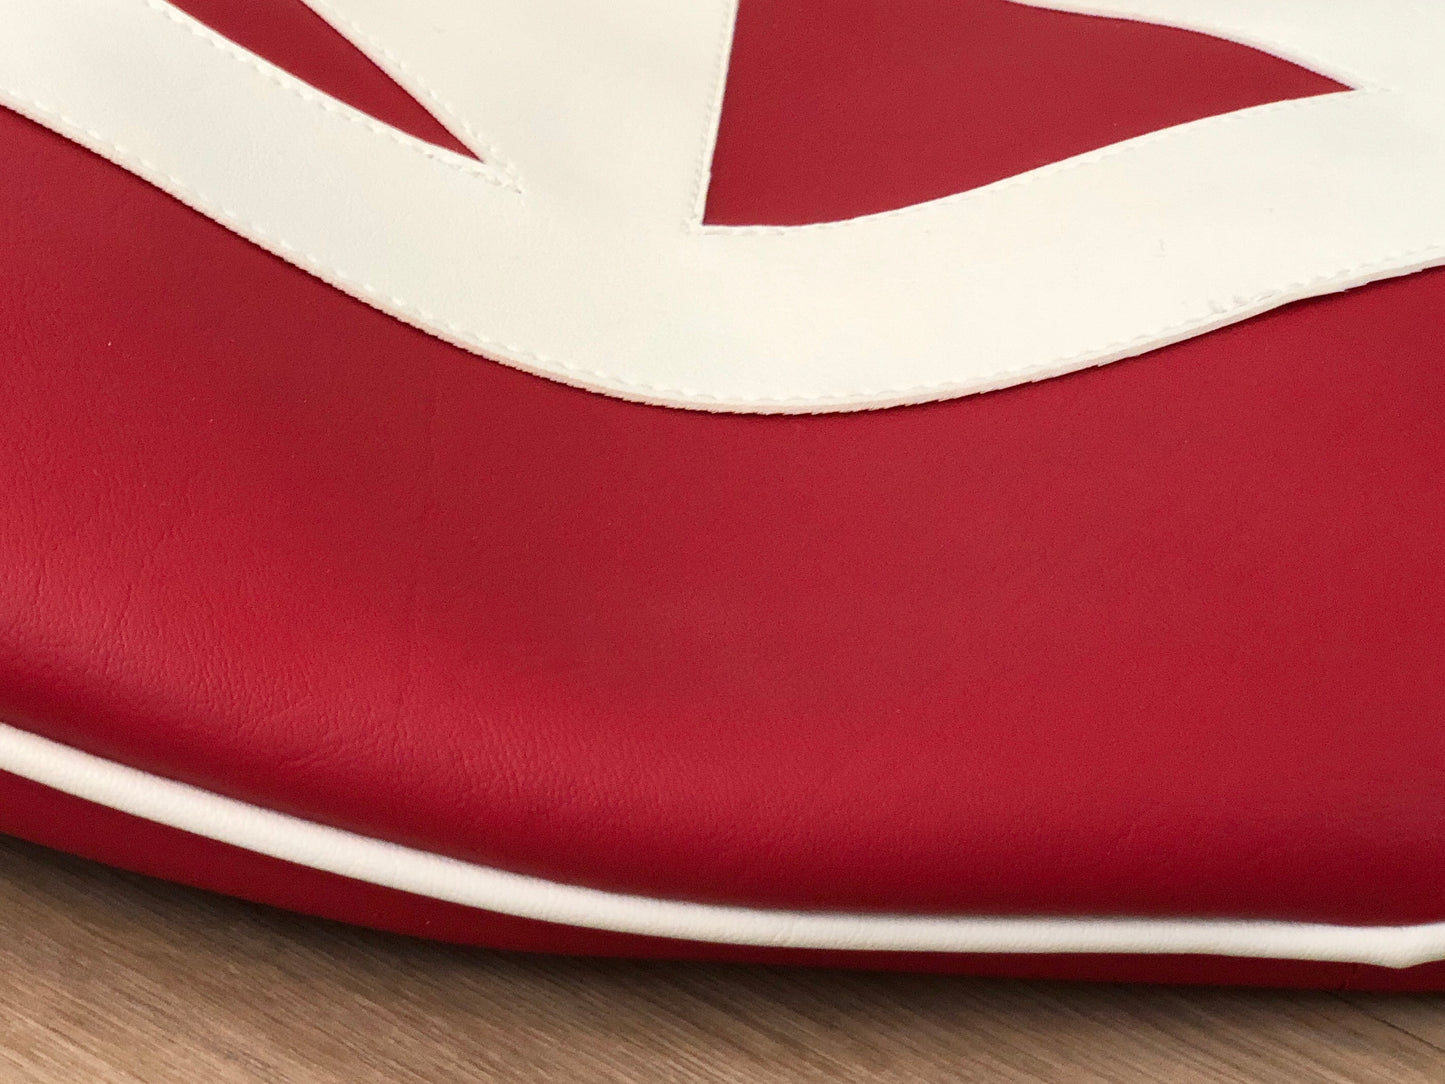 Spare Wheel Cover In Lollipop Red With White Logo